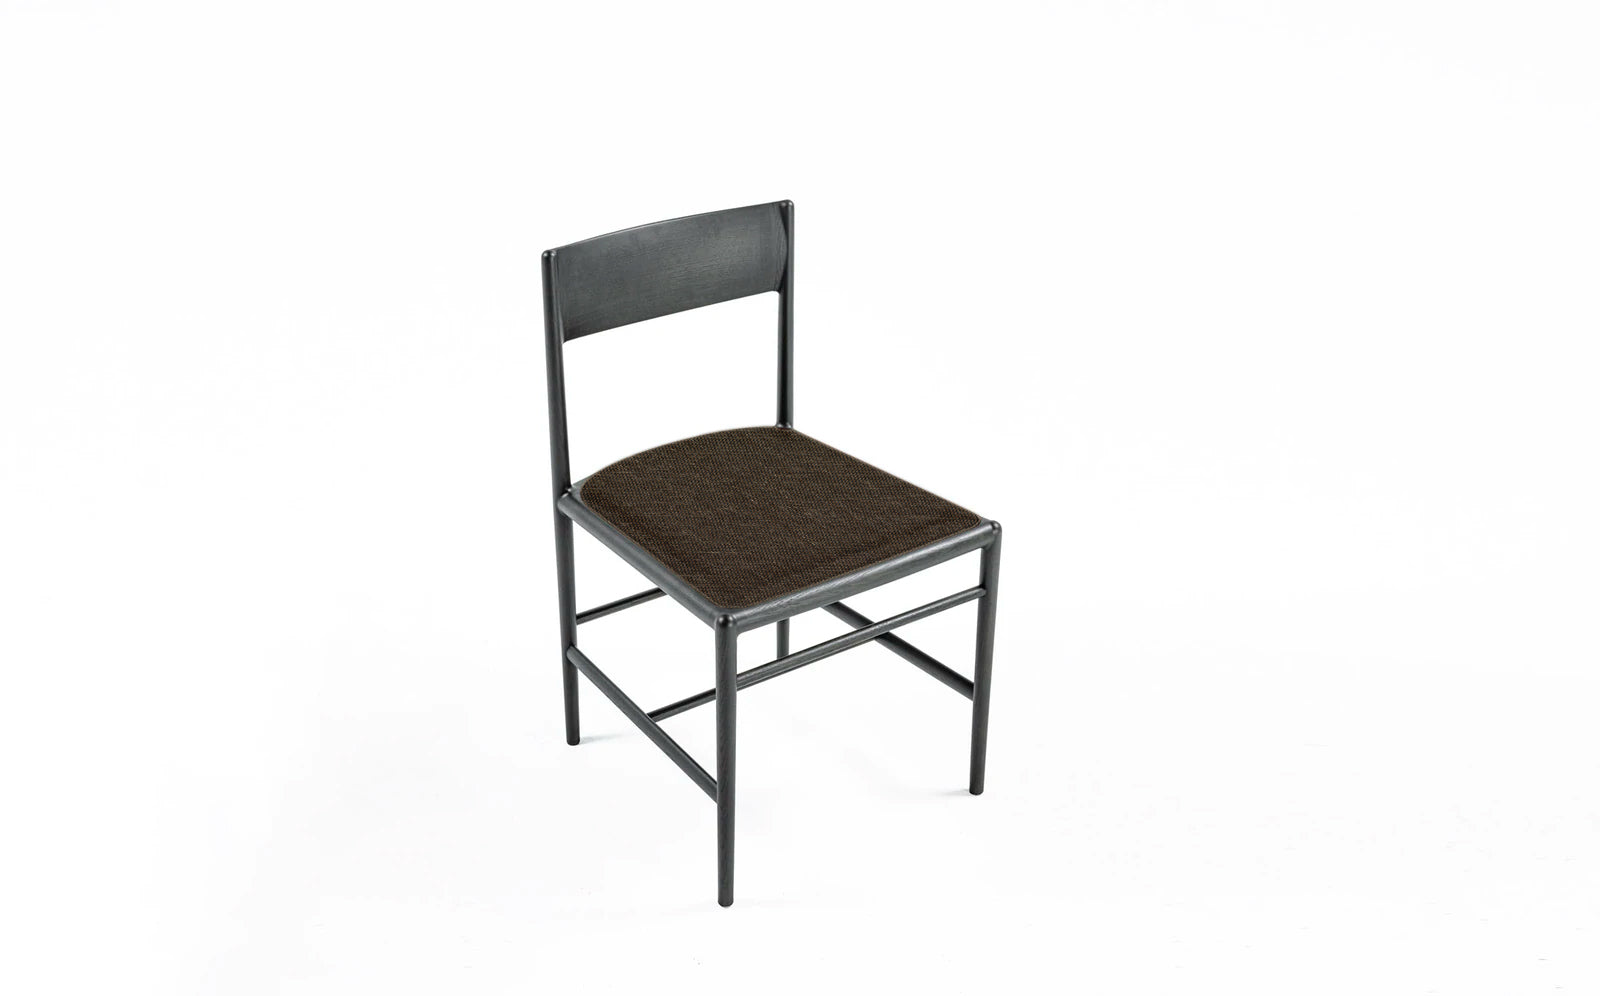 A chair on the vertical axis 